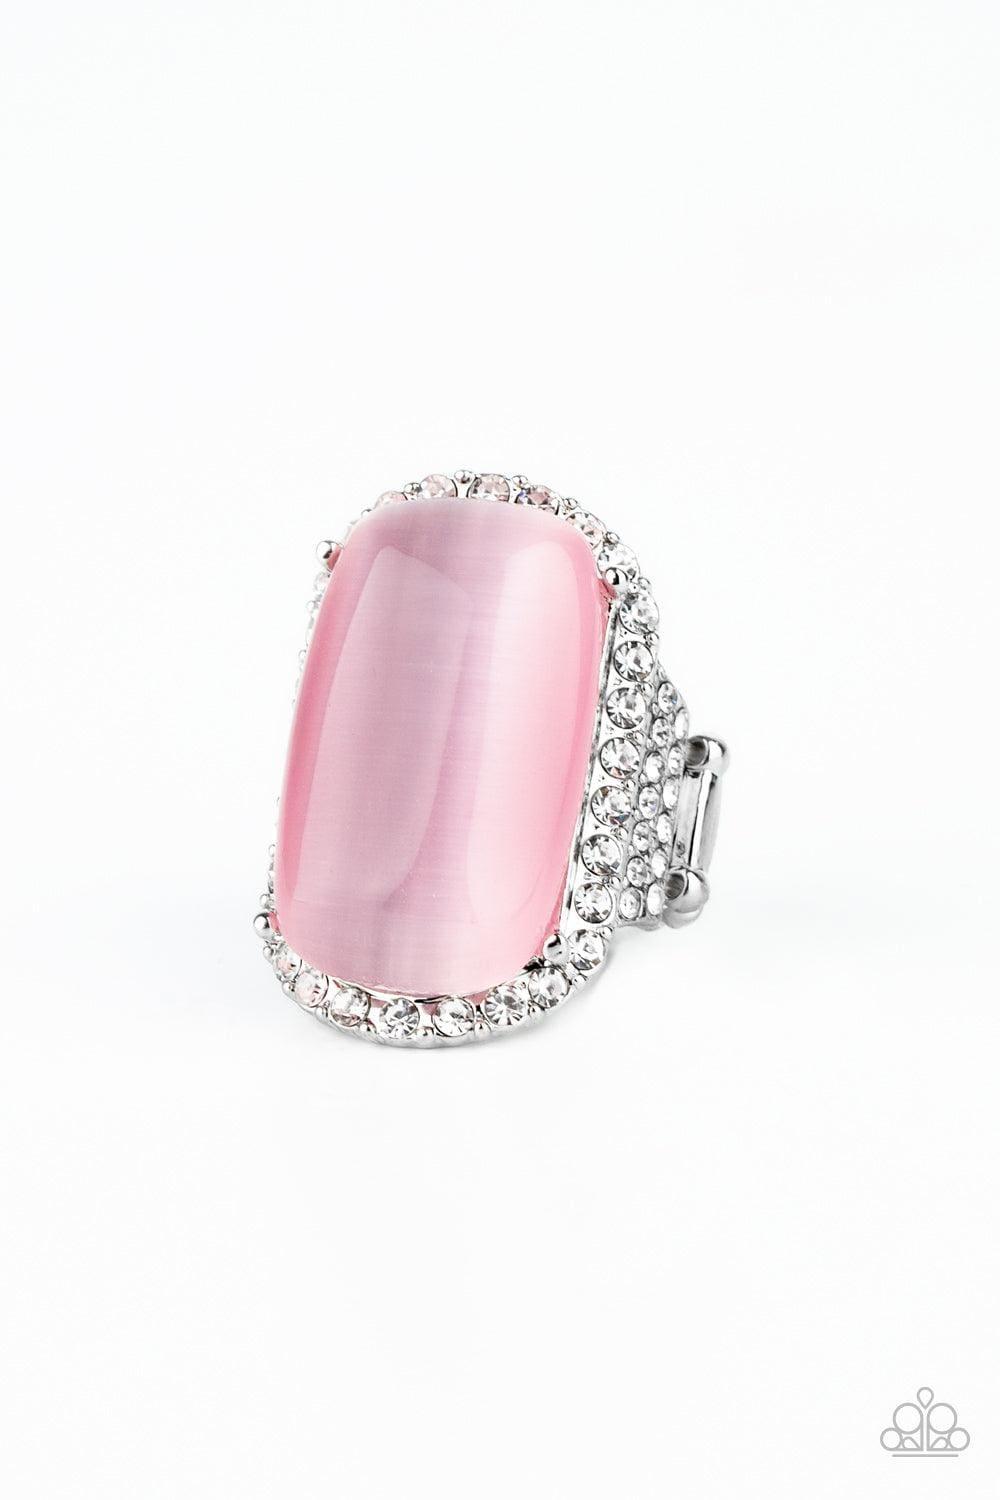 Paparazzi Accessories - Thank Your Luxe-y Stars - Pink Ring - Bling by JessieK